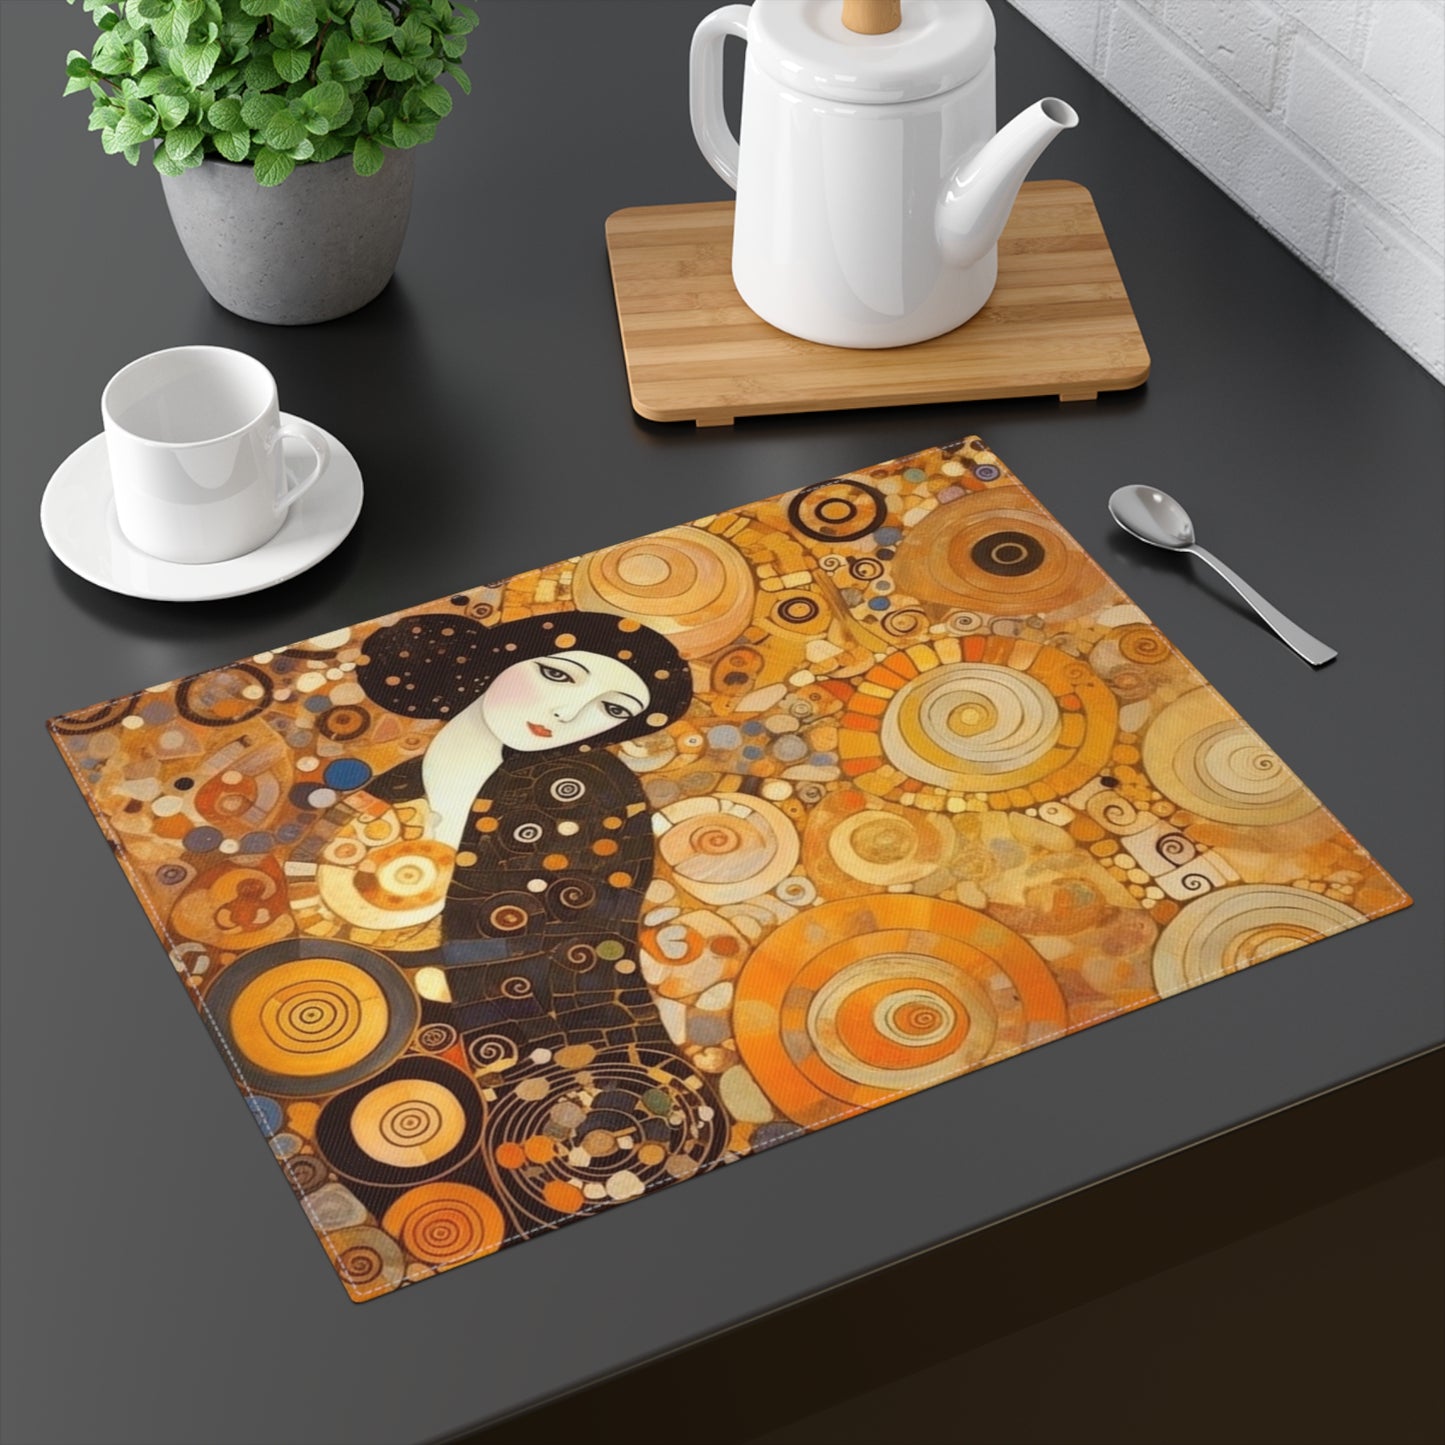 Sensual Symmetry: Placemat Embodying the Essence of Symbolism in 19th Century Art